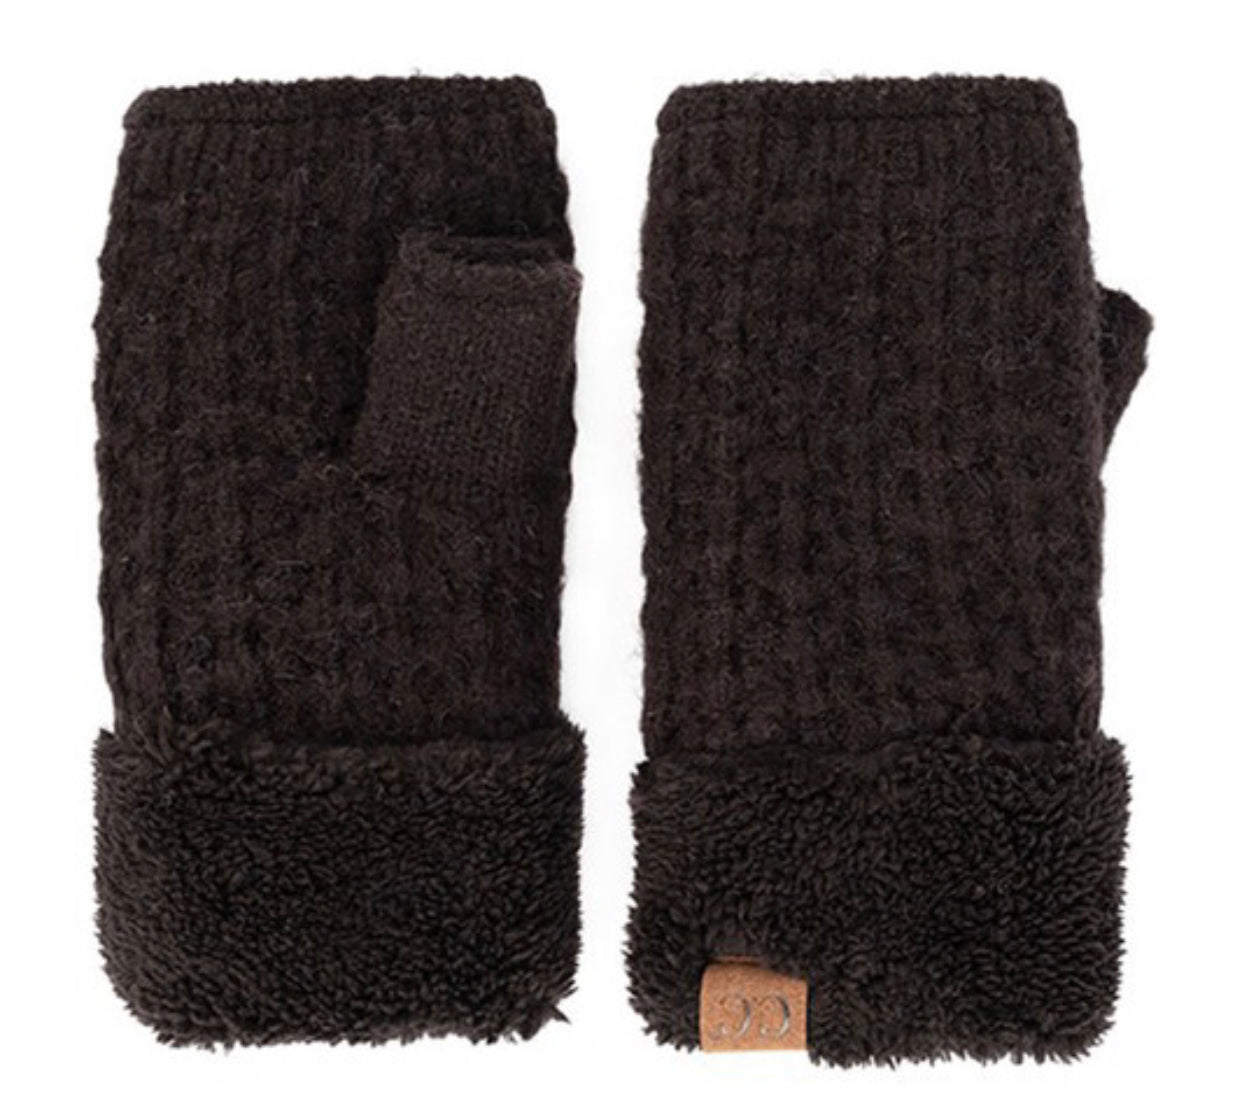 HOT ITEM! CC fingerless gloves with soft, warm lining (many colors available) - Black - Lisa’s Boutique